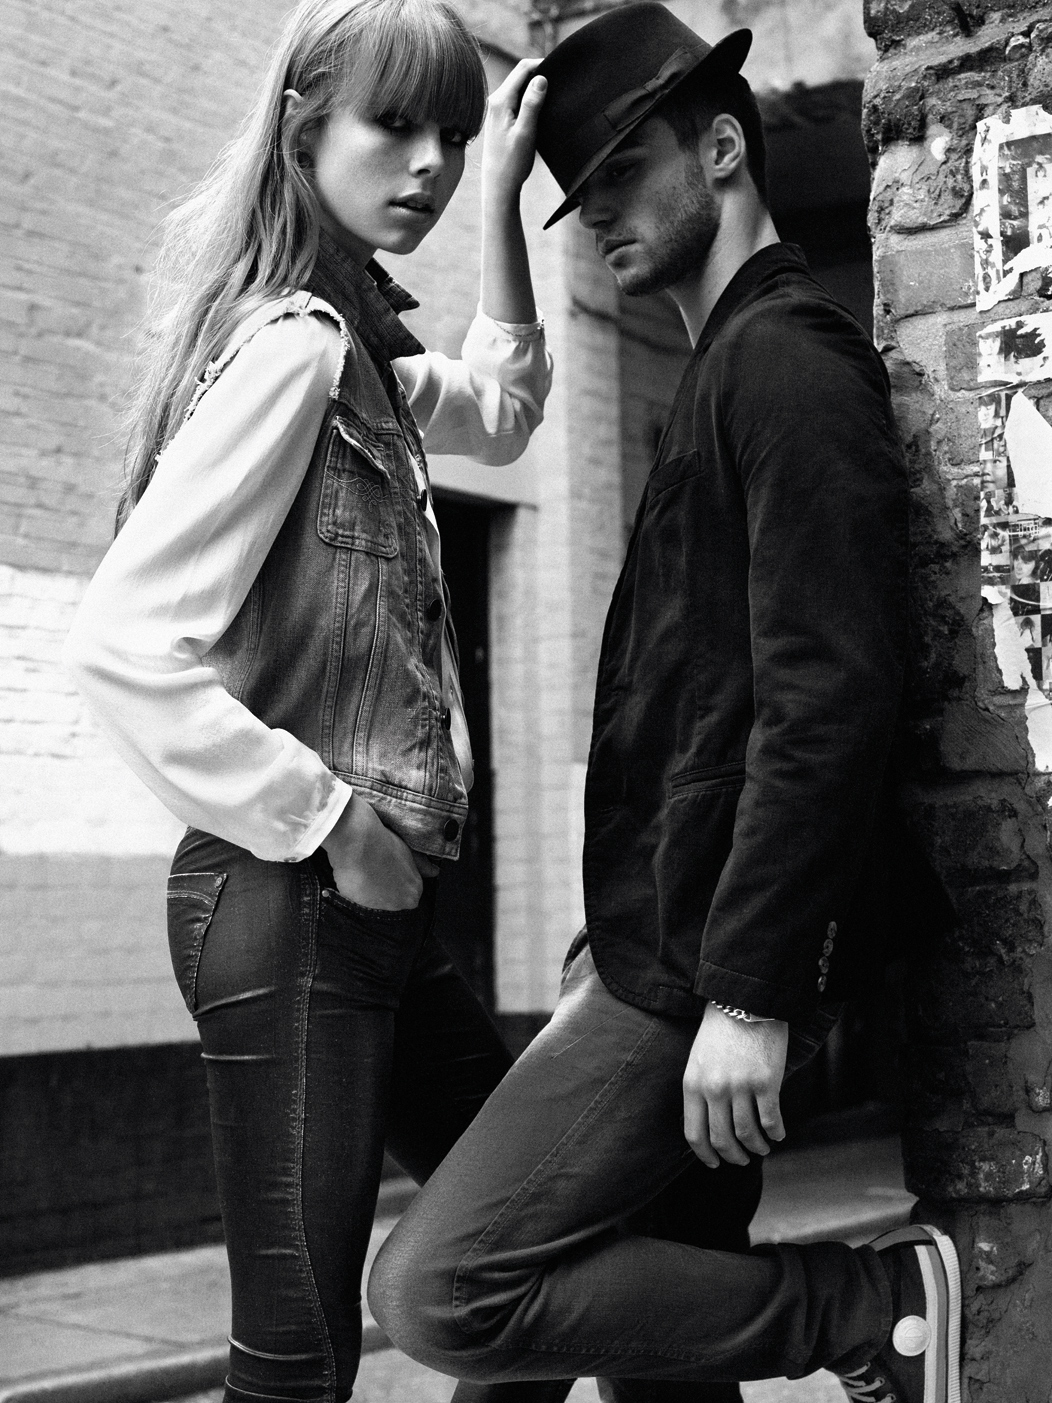 Pepe Jeans SS 2012 Ad Campaign 3